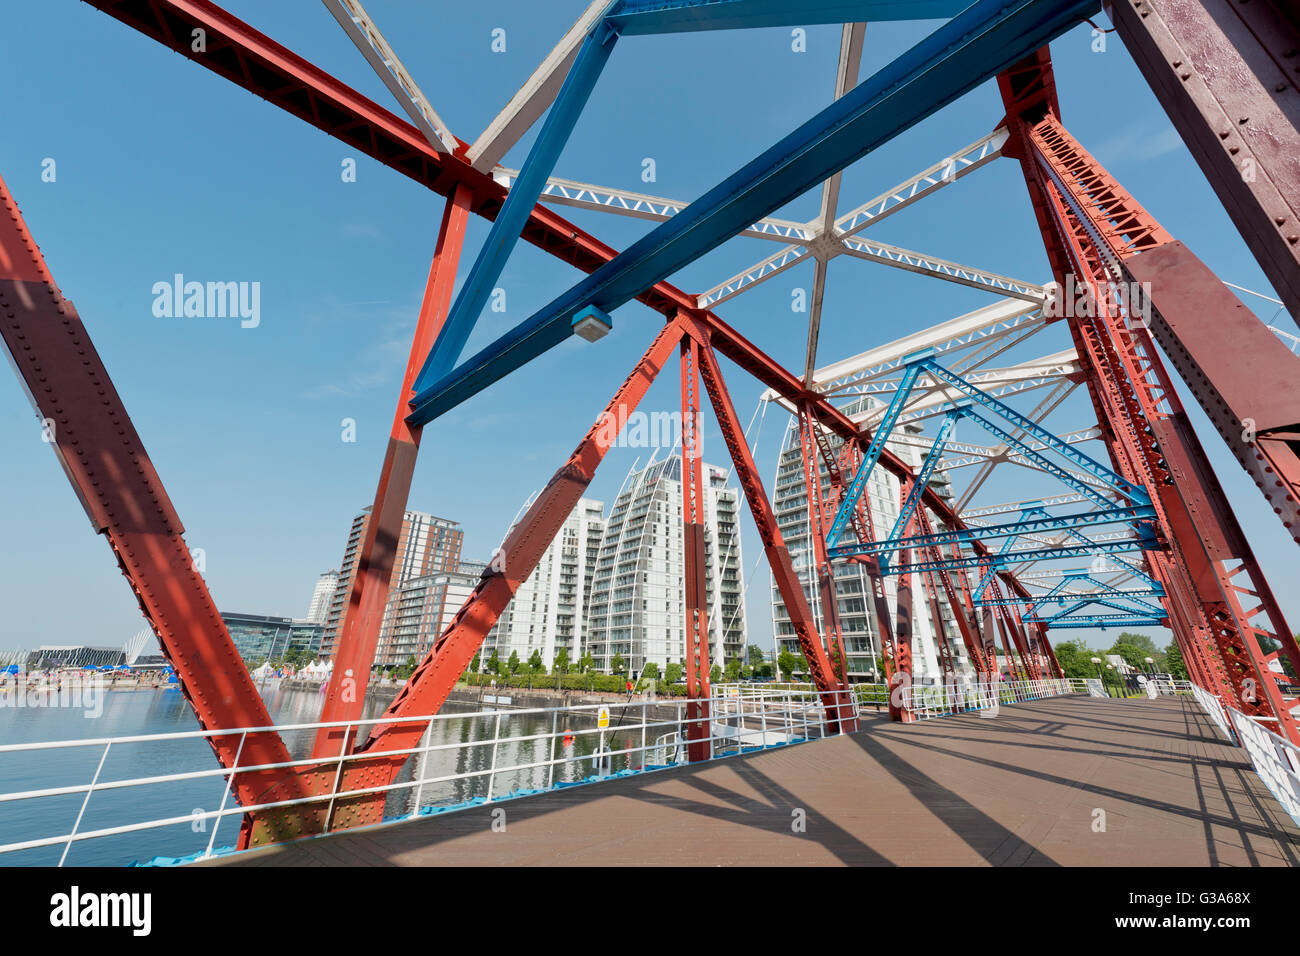 The Detroit Bridge footbridge spans the width of Dock 9 (Huron and Erie Basin) at Salford Quays in Greater Manchester. Stock Photo